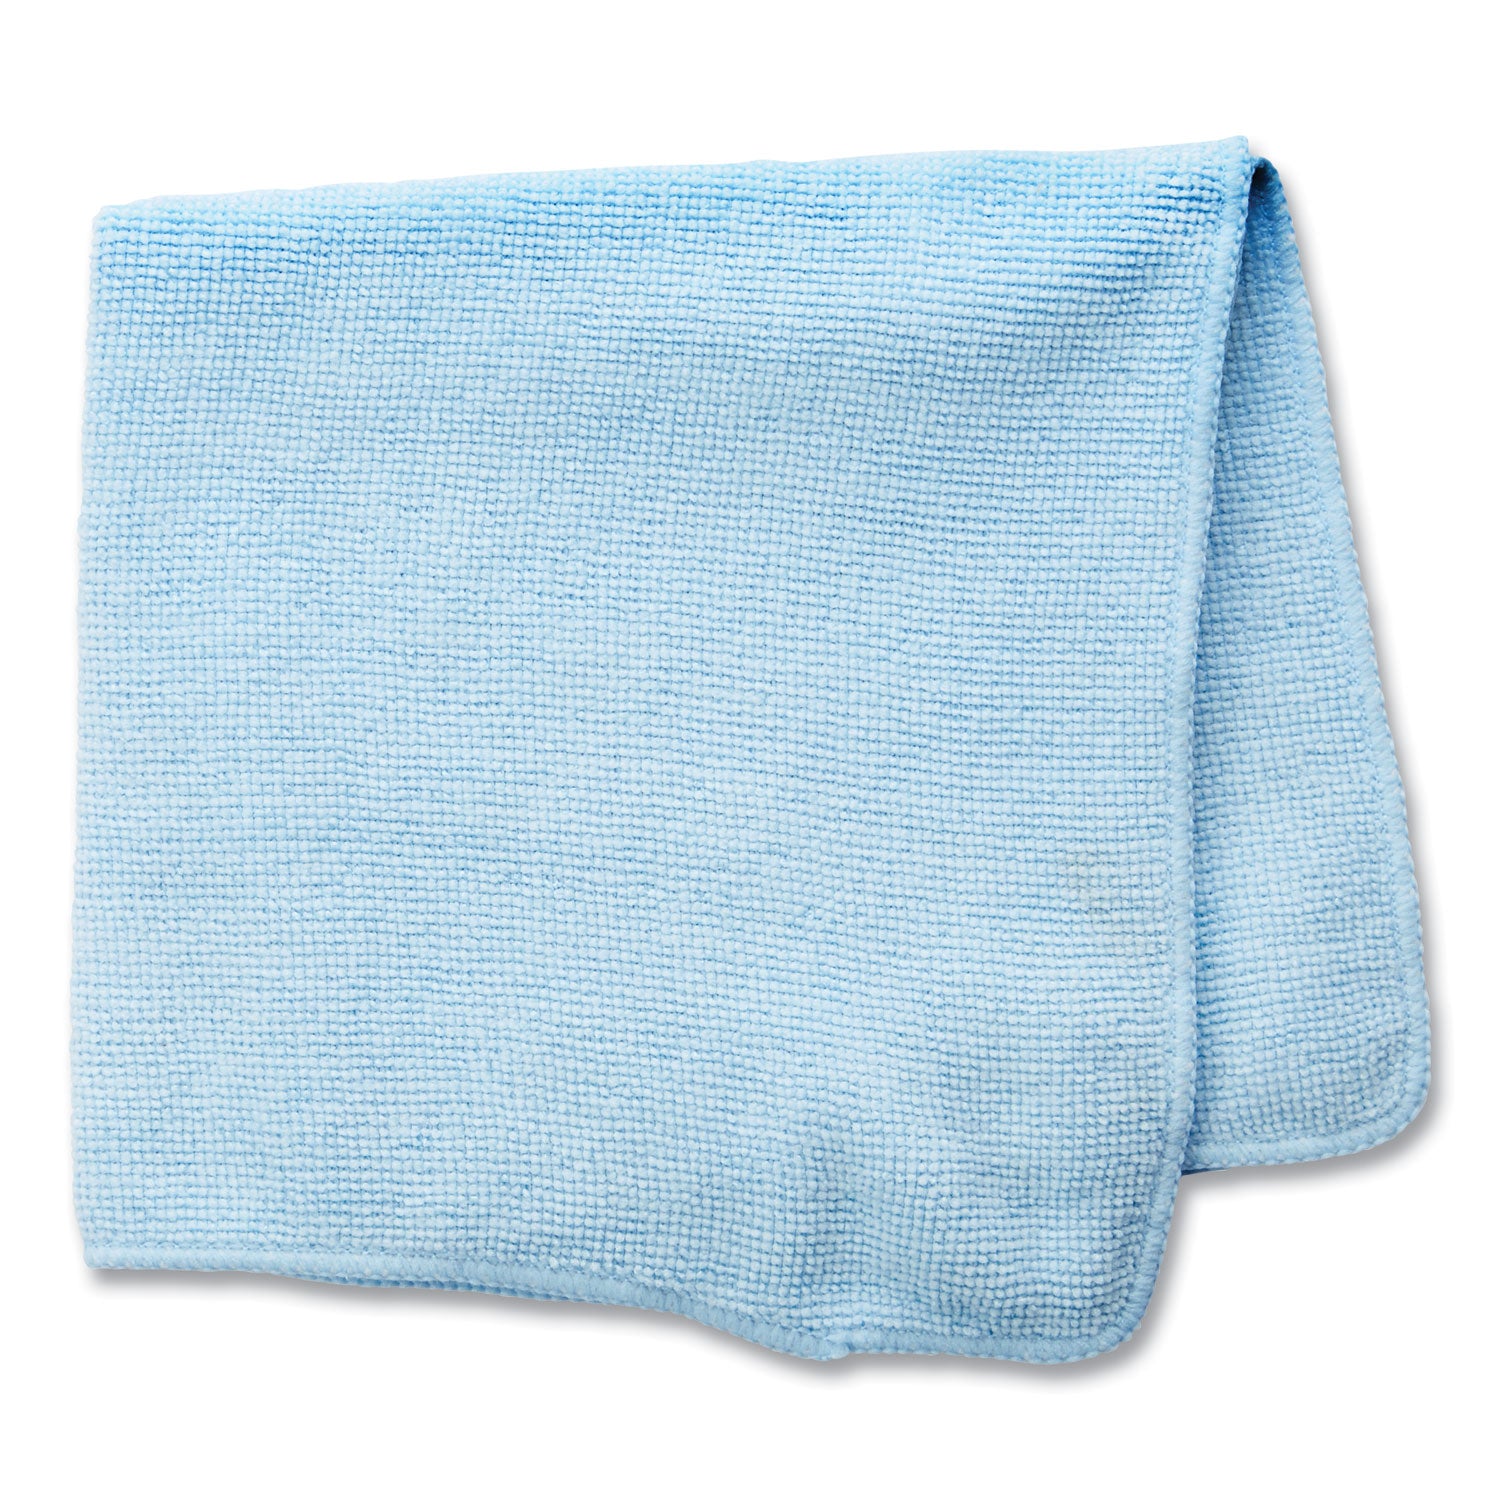 Microfiber Cleaning Cloths, 16 x 16, Blue, 24/Pack - 